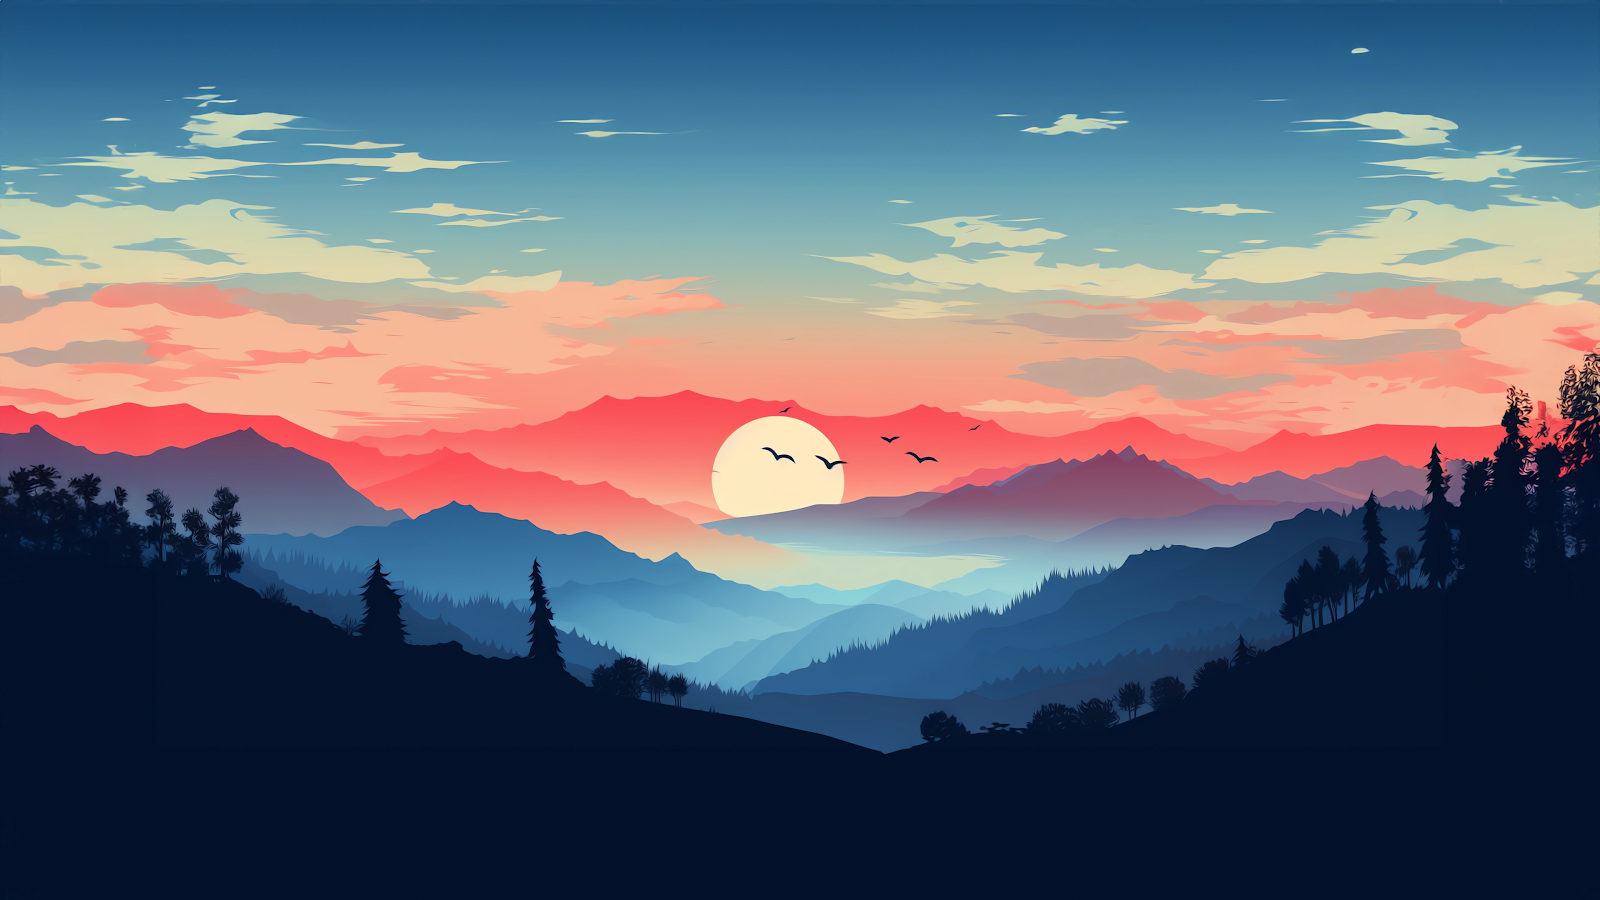 Mountain Sunset Serenity: 4K PC Wallpaper with Simple Landscape